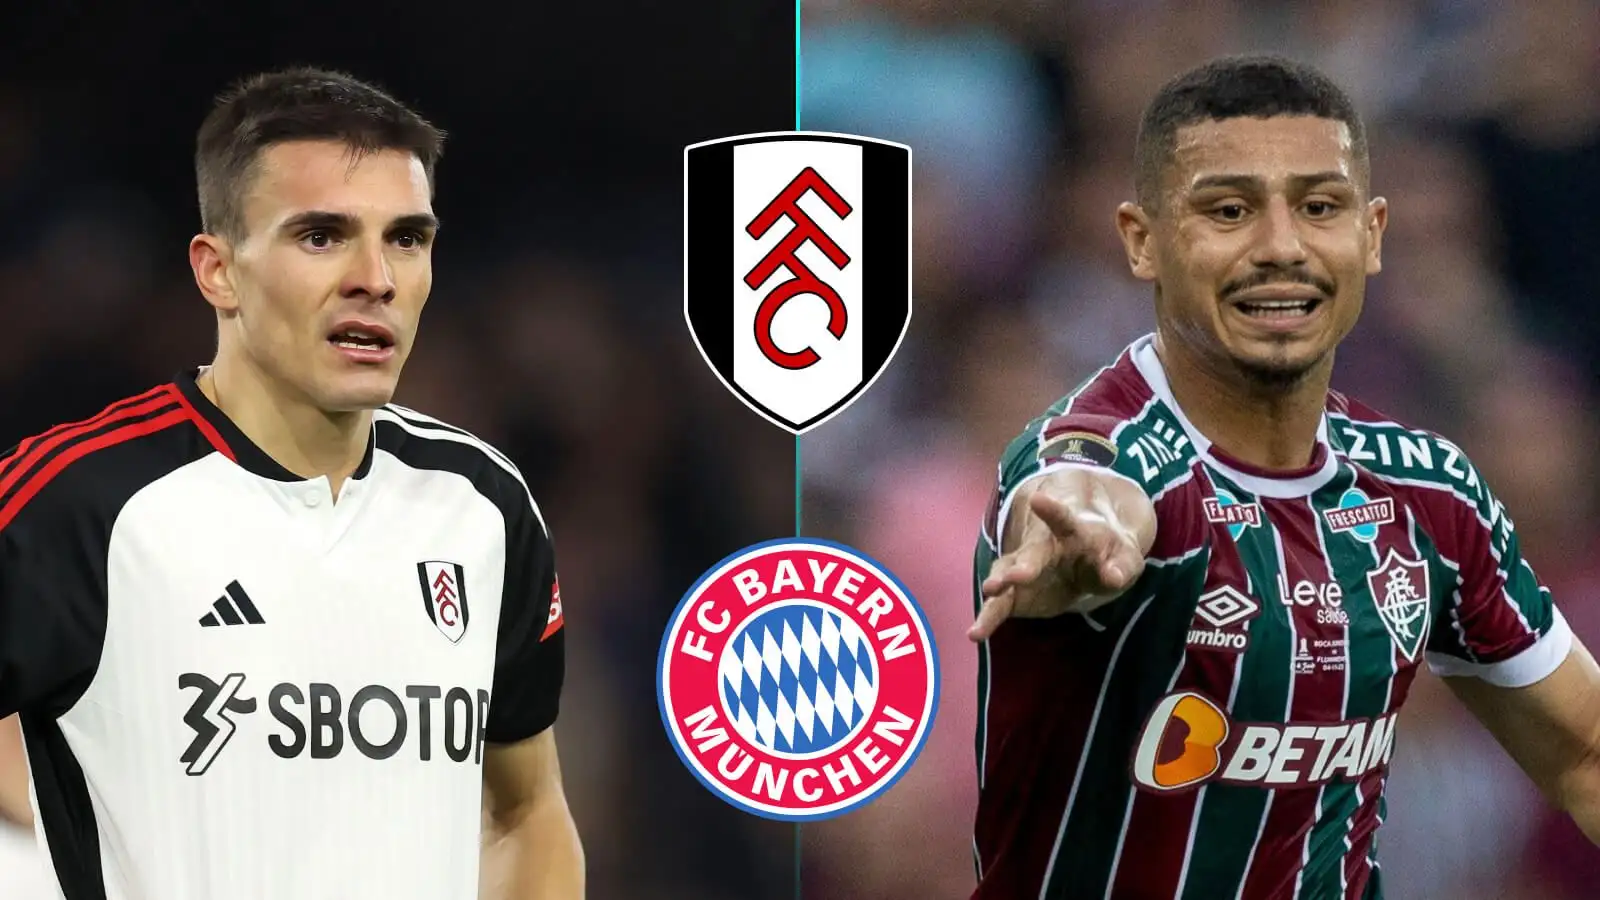 Fulham will possibly lone seek Andre if Bayern indicator Joao Palhinha, according to records.